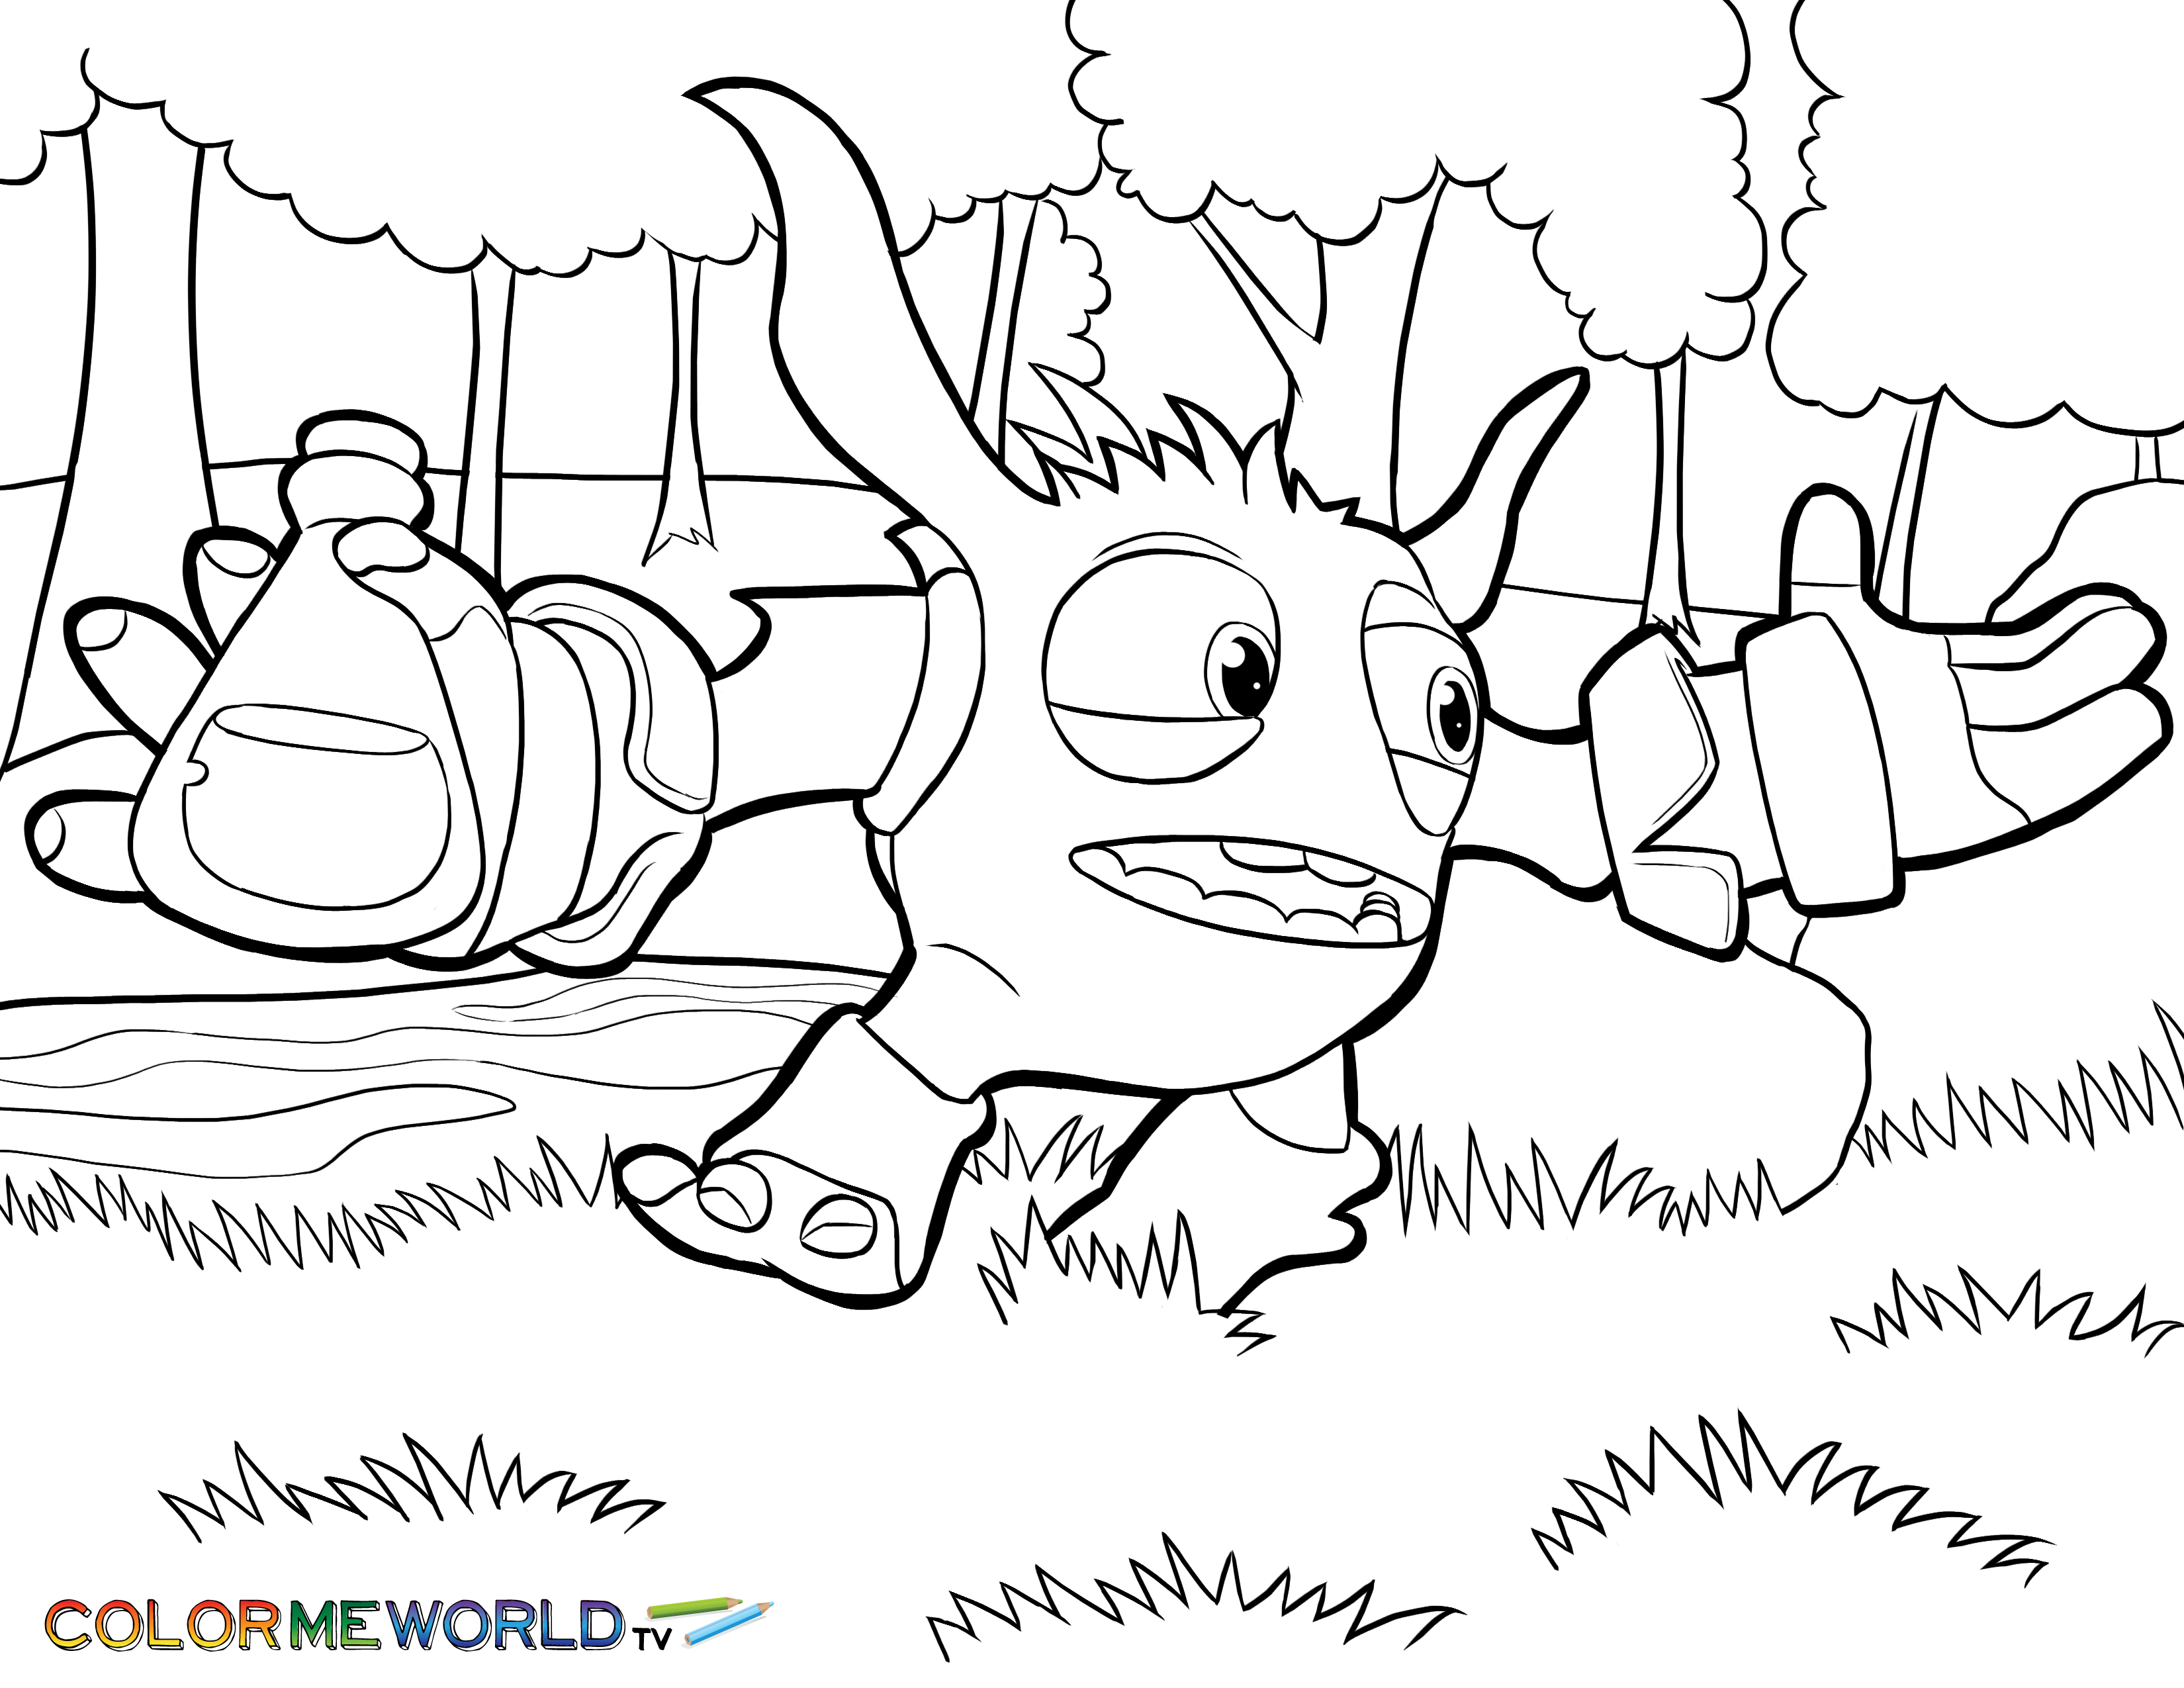 coloring pages skylanders - High Quality Coloring Pages